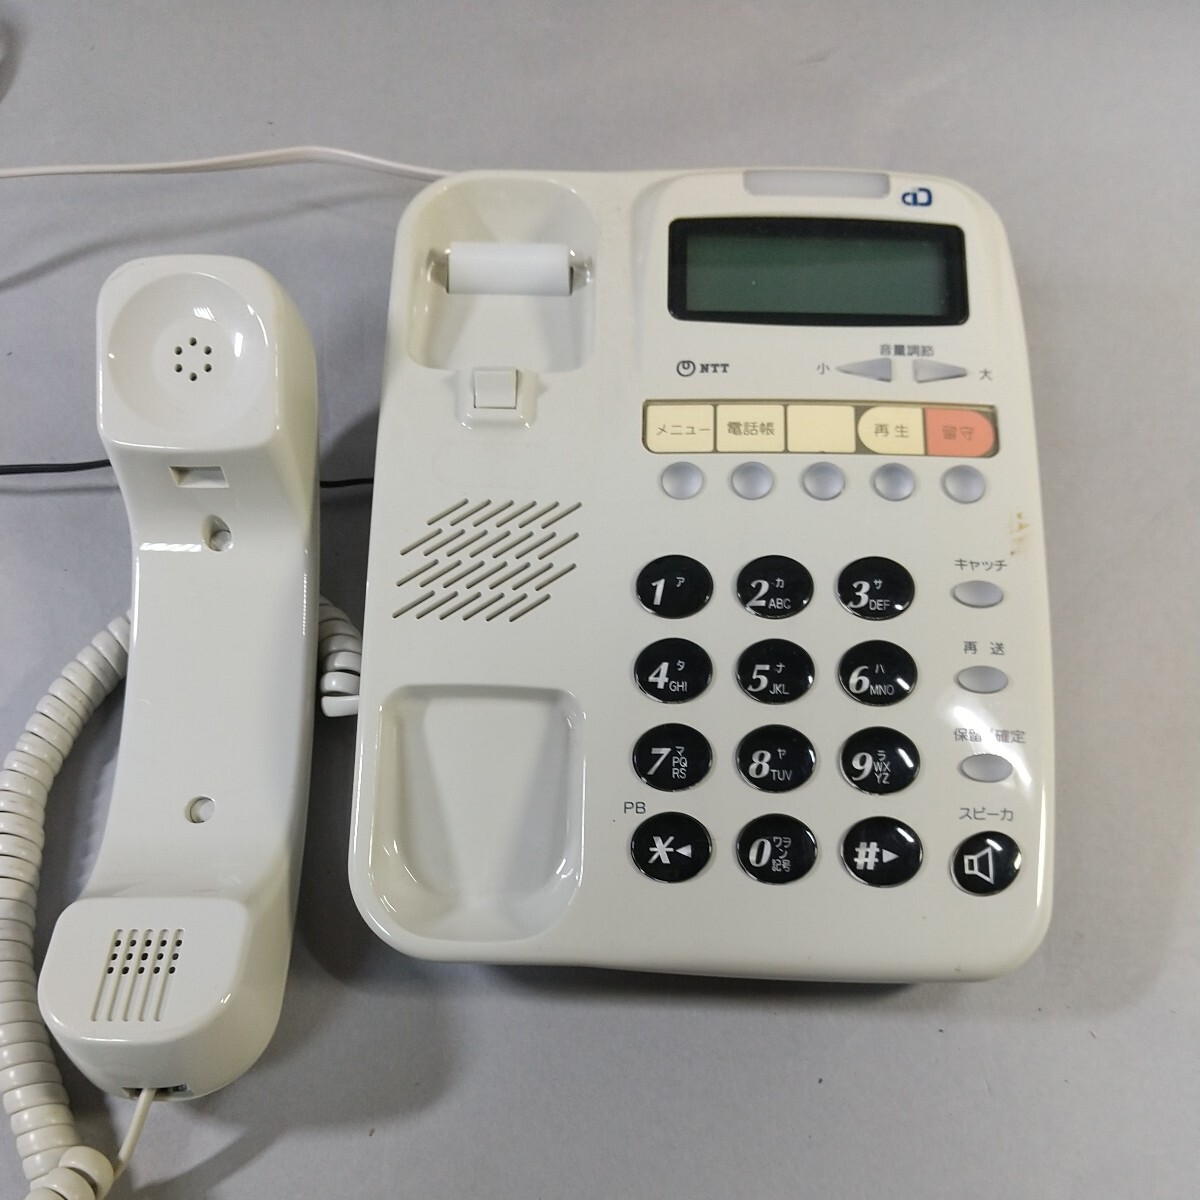 9786# including in a package NG is ude . super Ⅲ NTT East Japan office telephone telephone machine universal design . story vessel Home telephone business ho n present condition 